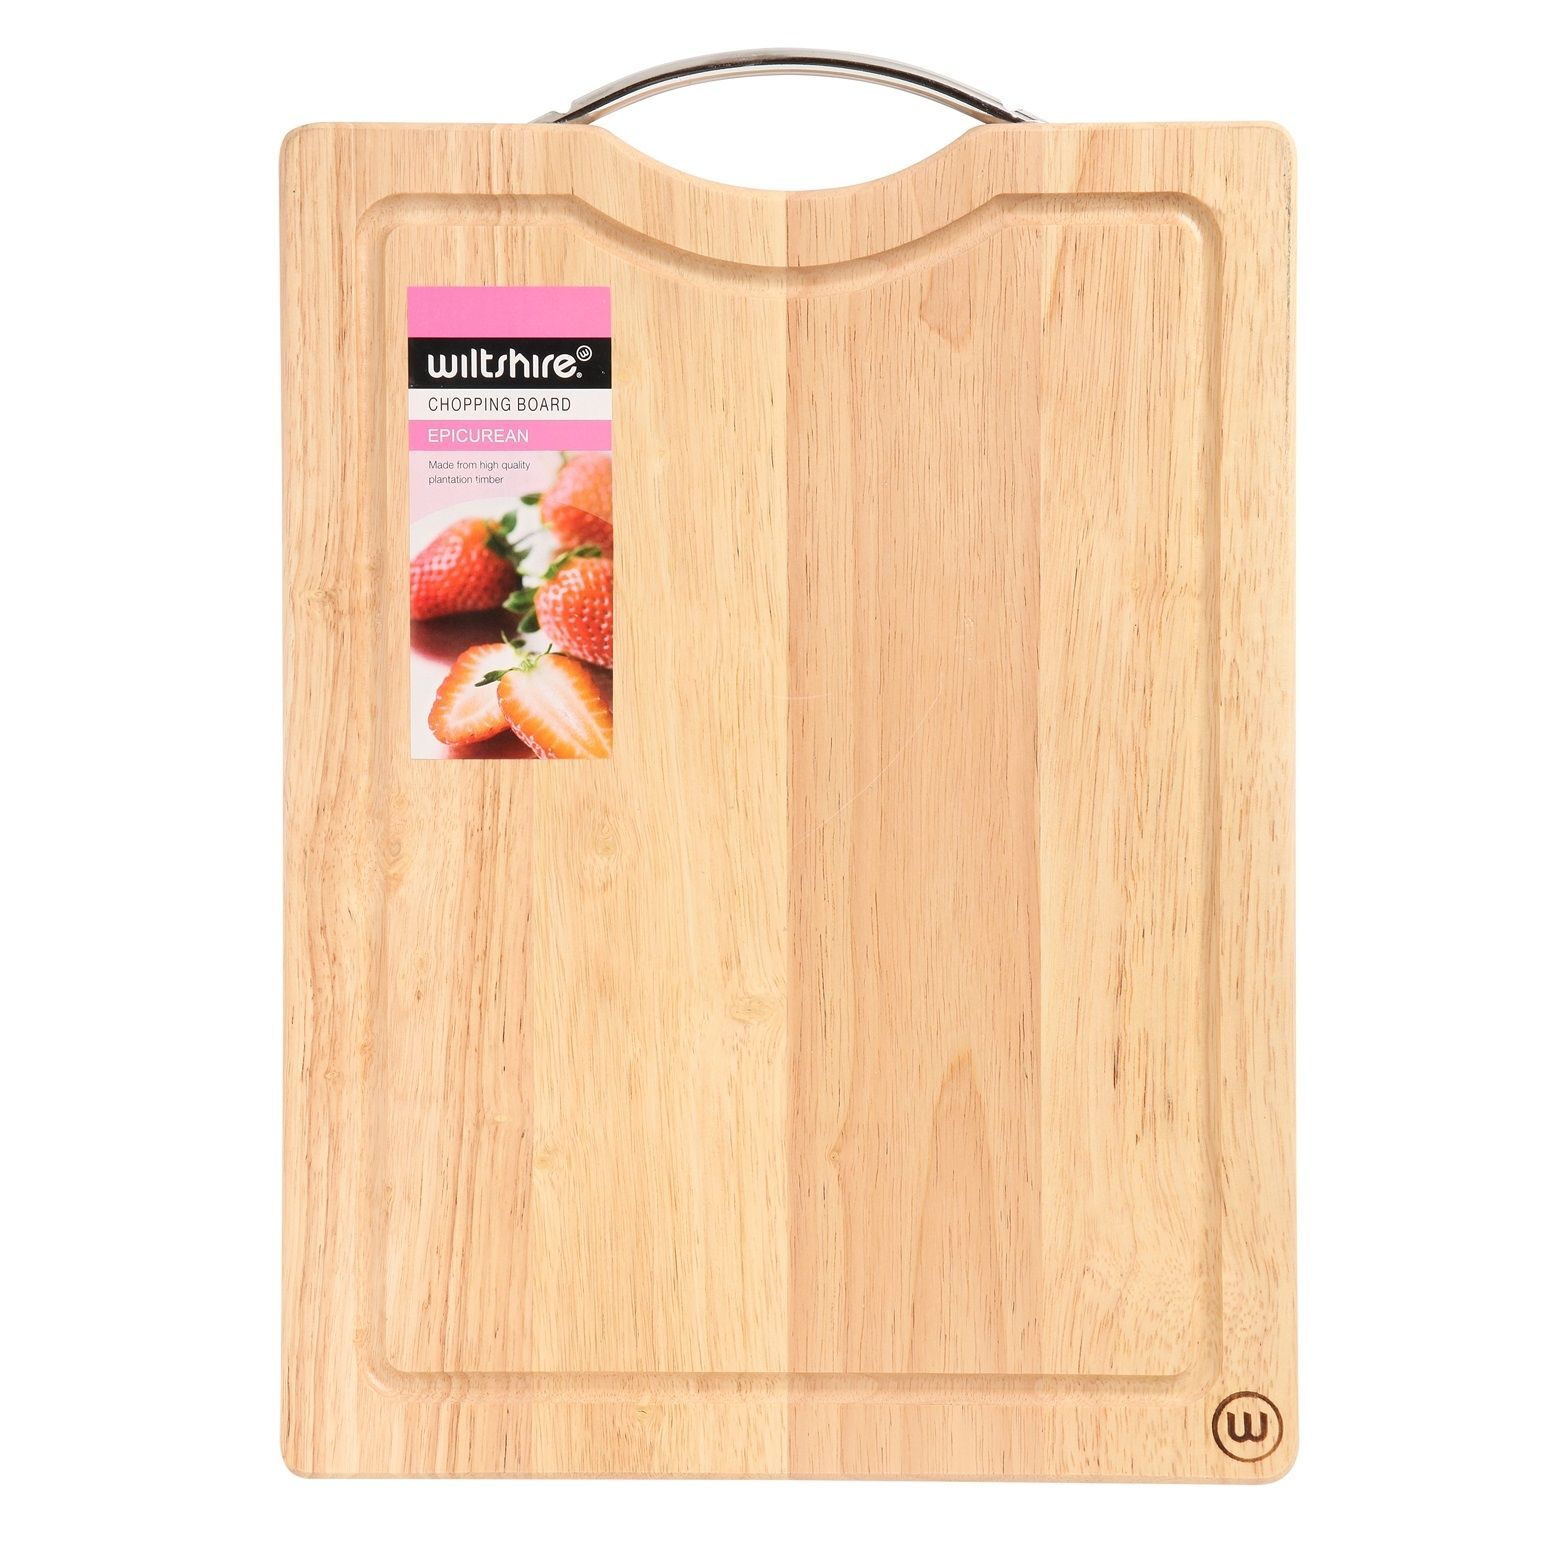 Wiltshire Epicurean Chopping Board - Large